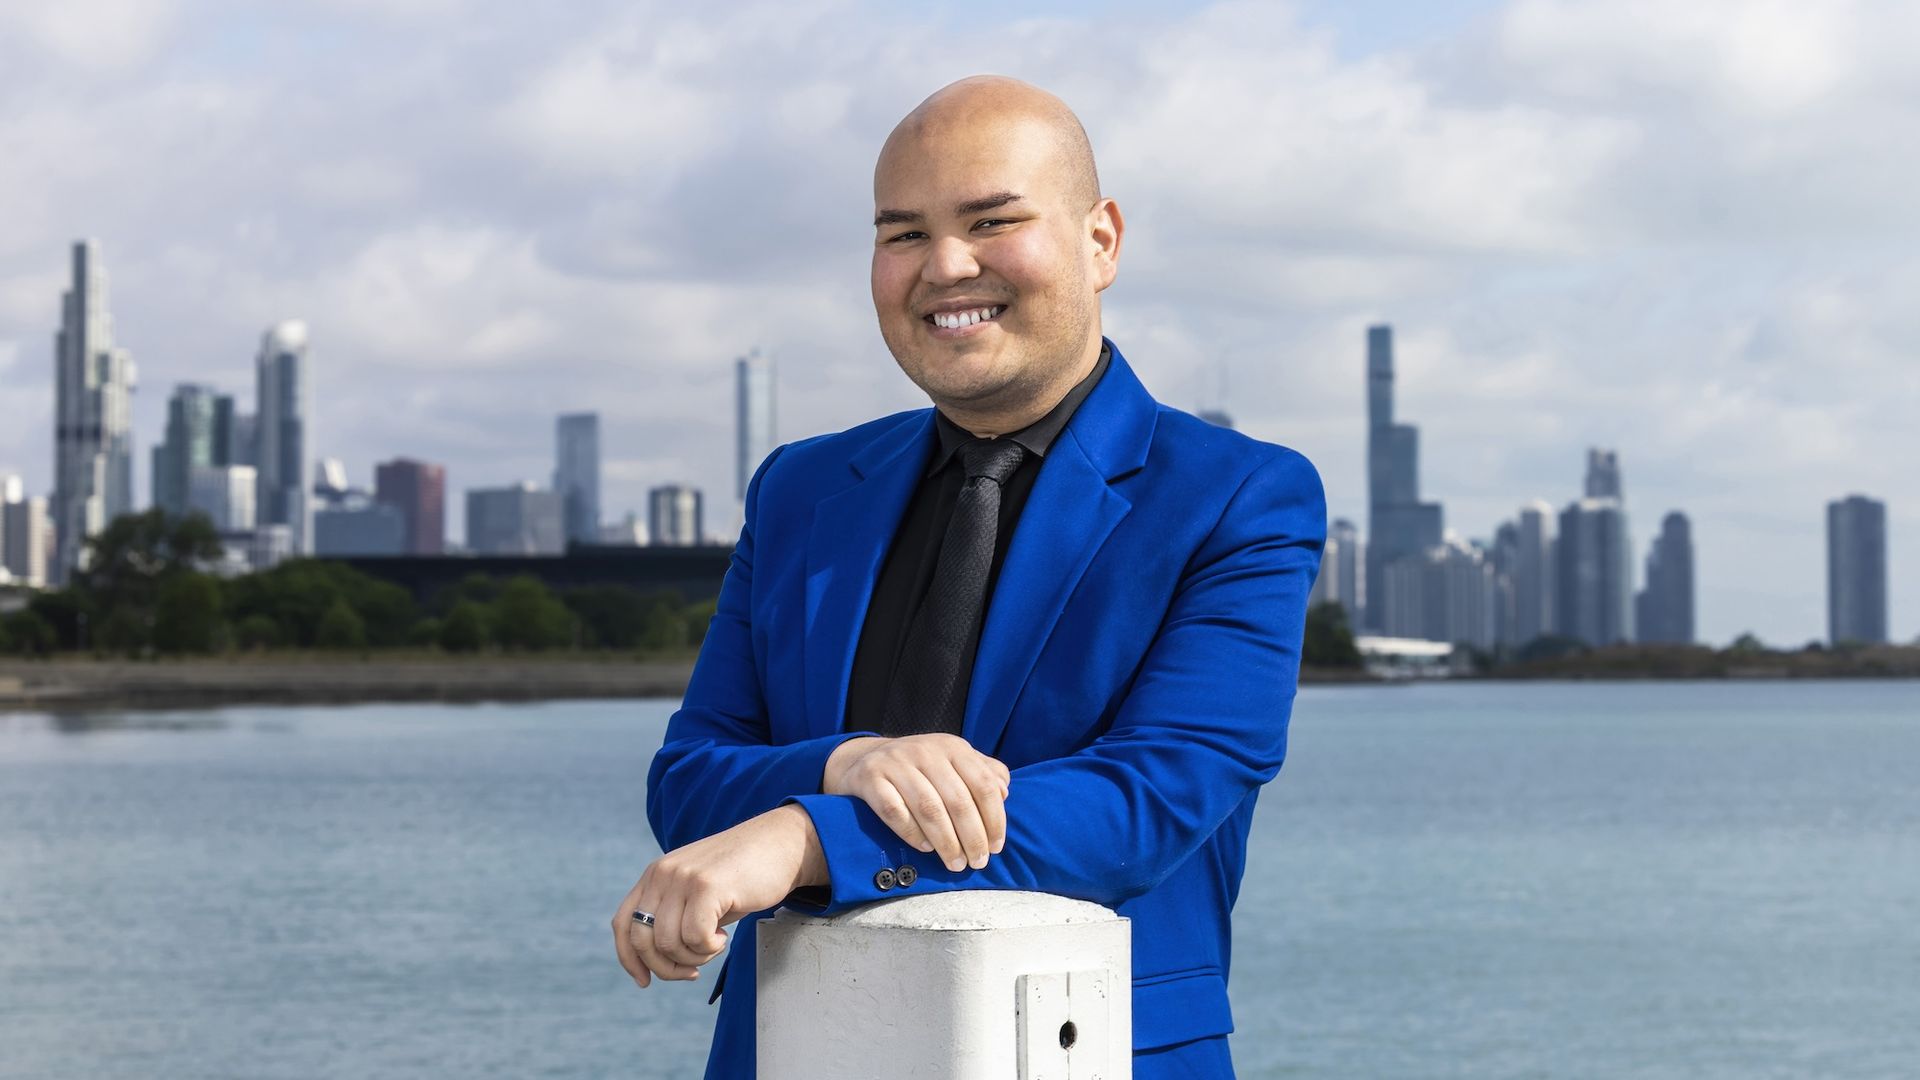 Man in blue suit with black shirt standing in front of lake with skyline in the background.